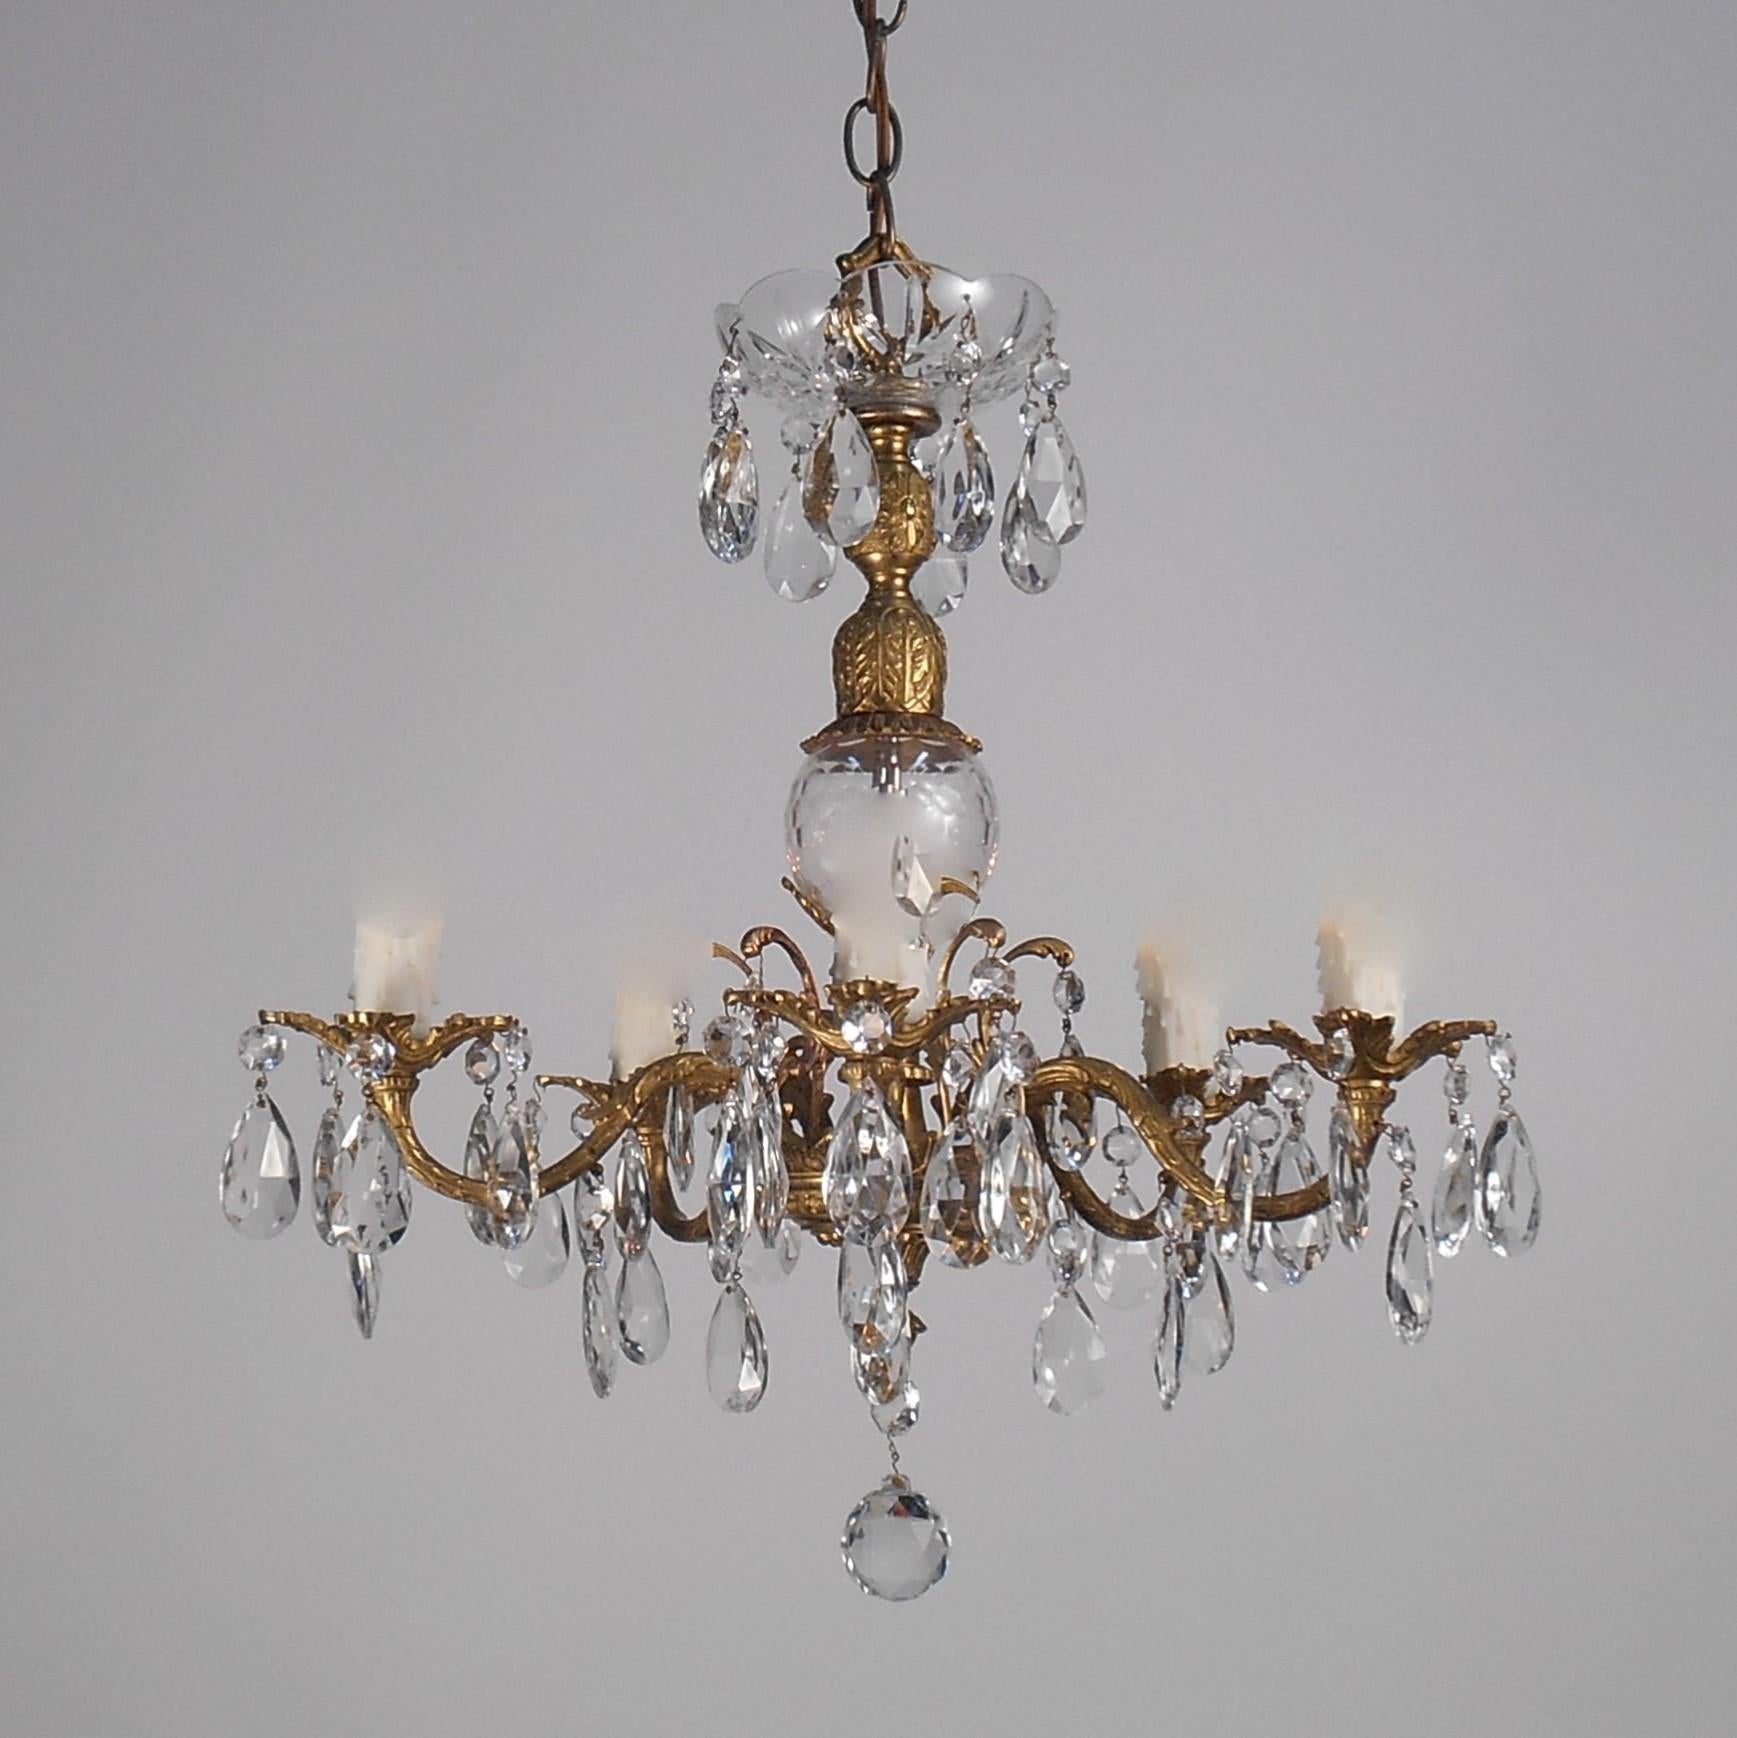 Nicely detailed brass chandelier with high quality crystals. Each intricately detailed arm supports a beautiful acanthus leaf Boesch and ivory-colored 2